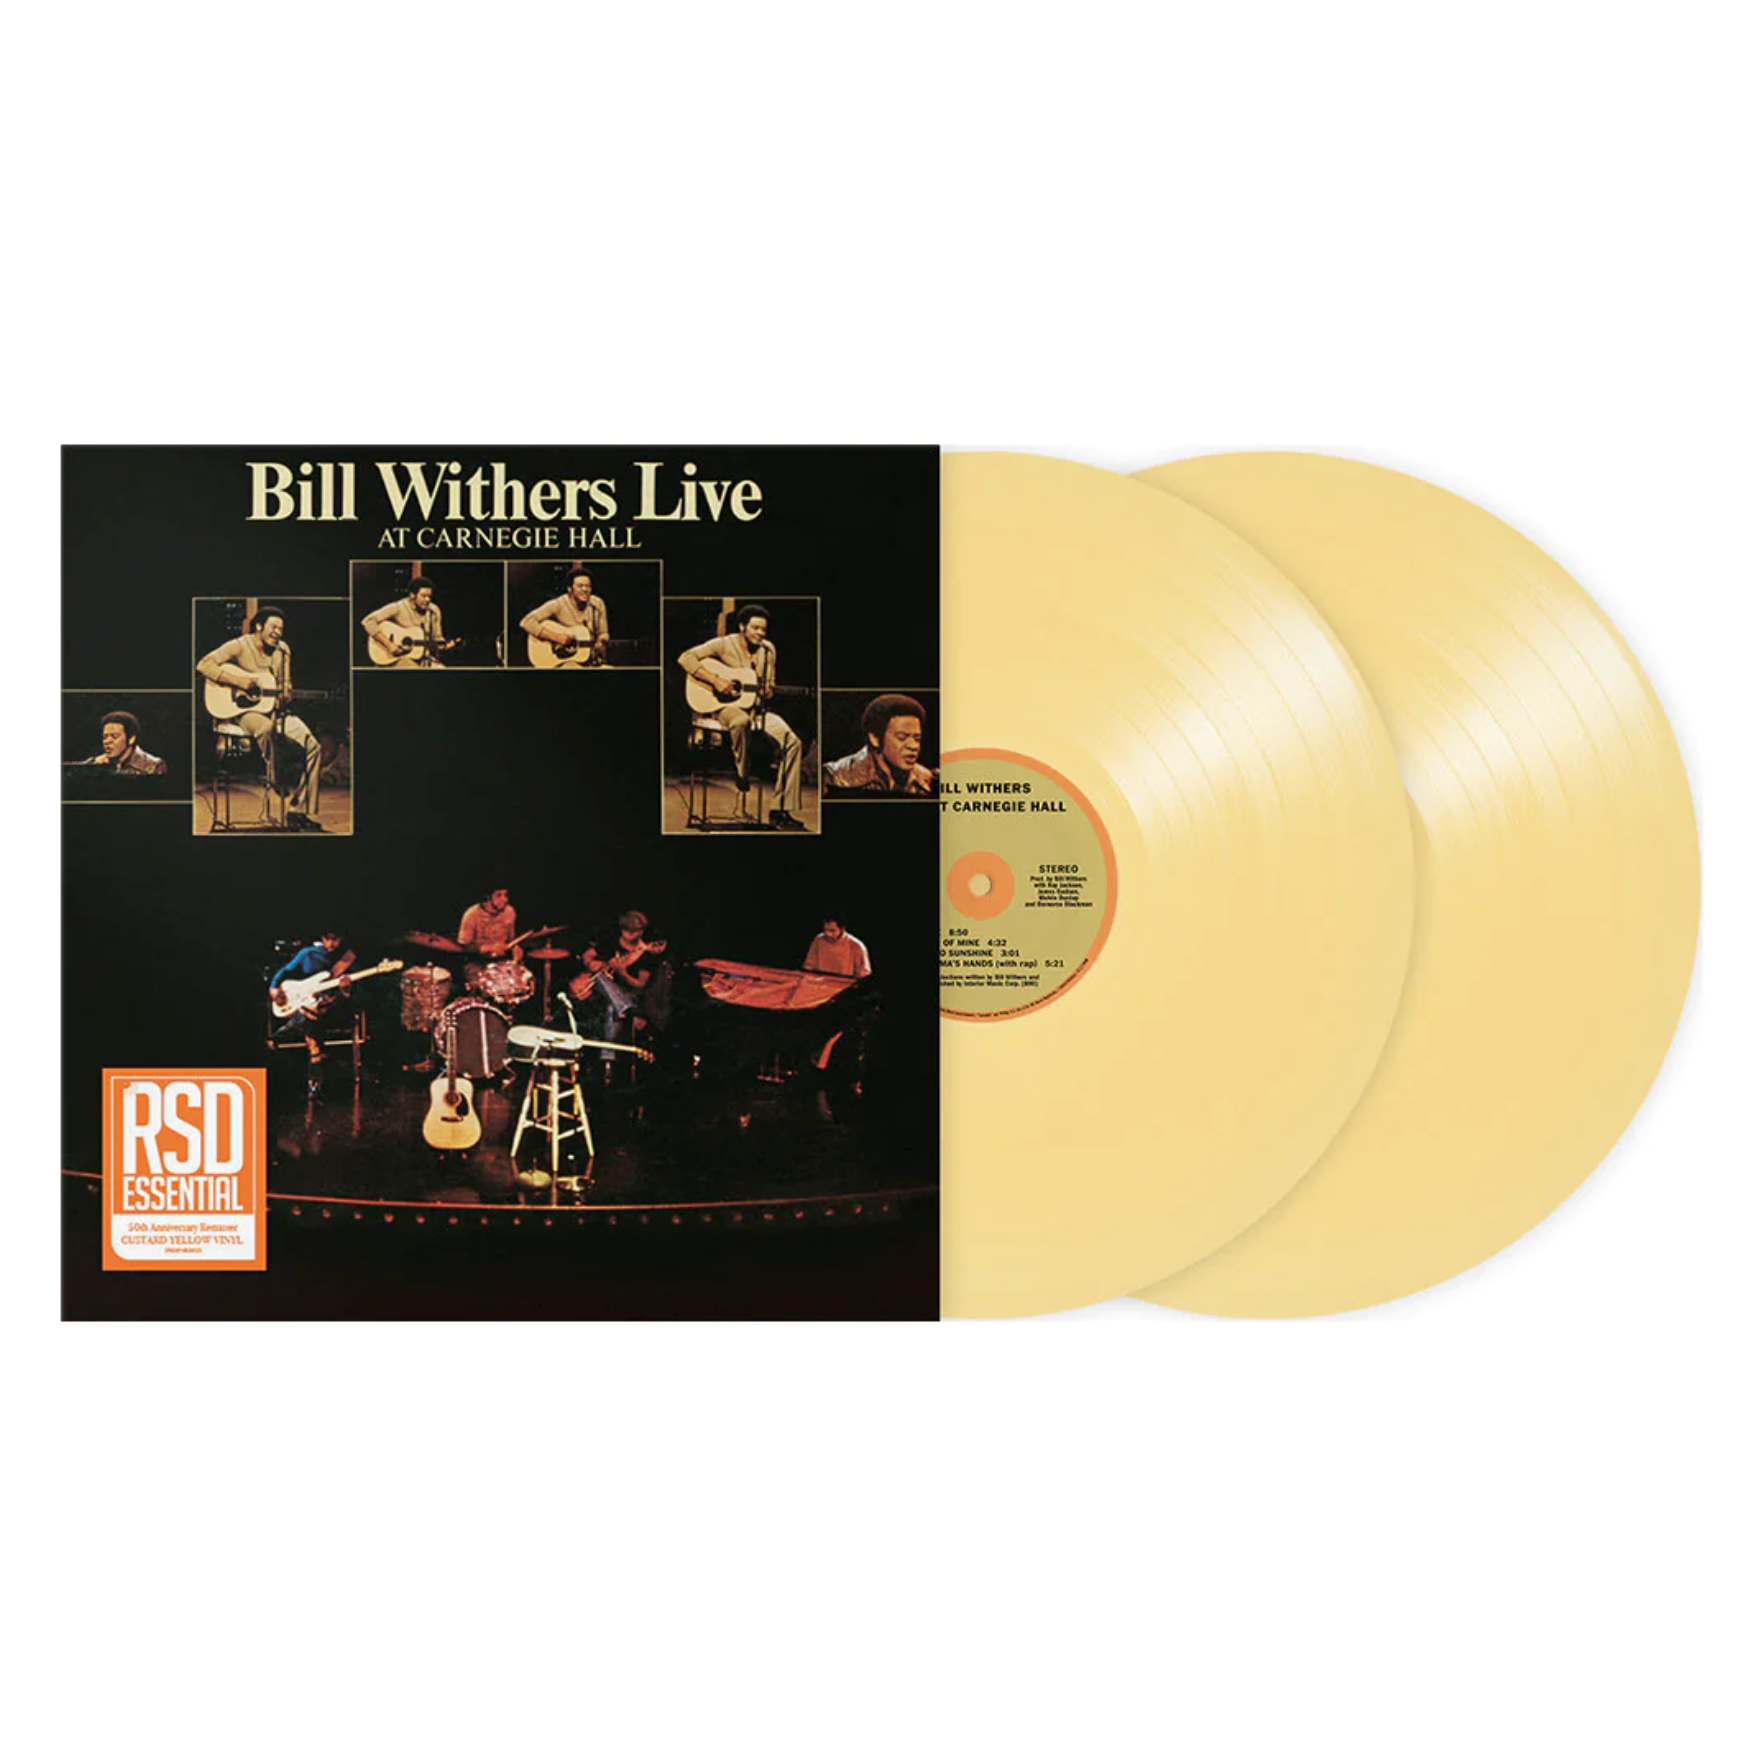 [DAMAGED] Bill Withers - Live At Carnegie Hall [Custard Yellow Vinyl]